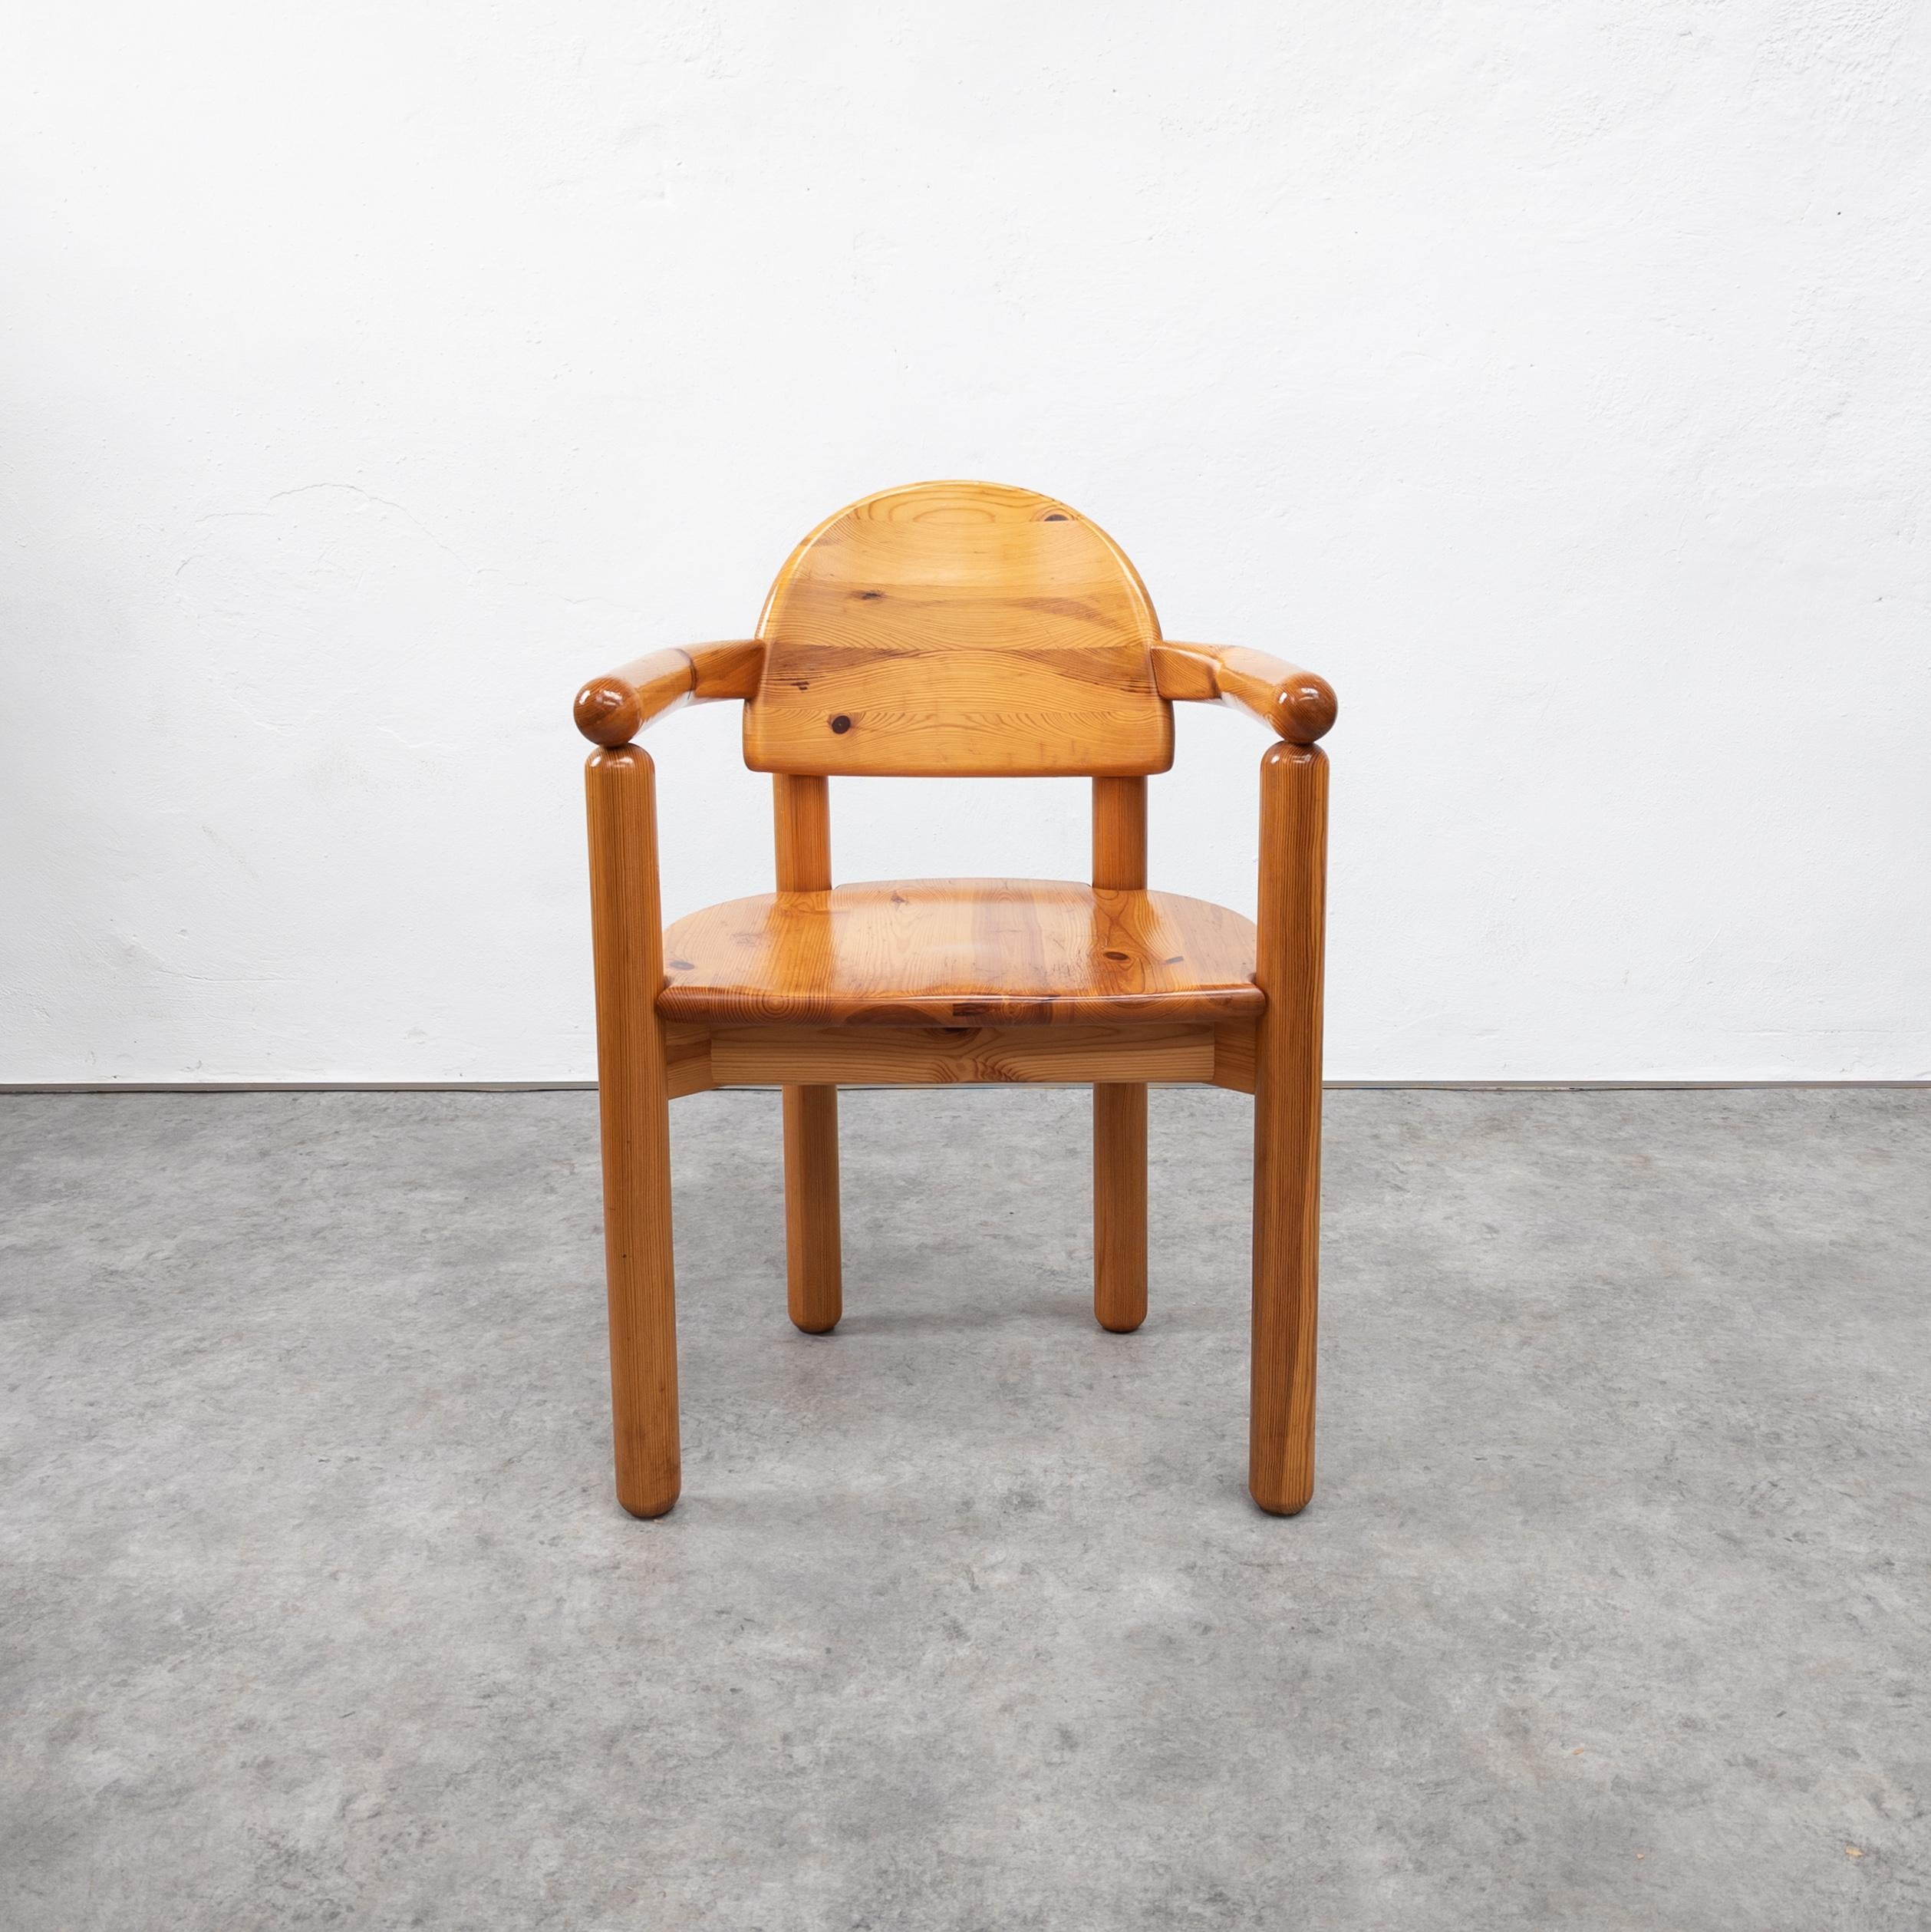 Pine wood armchair by the Danish architect Rainer Daumiller, produced by Hirtshals Sawmill during the 1970s. Solid pine wood structure with smooth rounded woodwork and sculpted seats.
Elegant yet rustic and very comfortable to sit in, this chair has